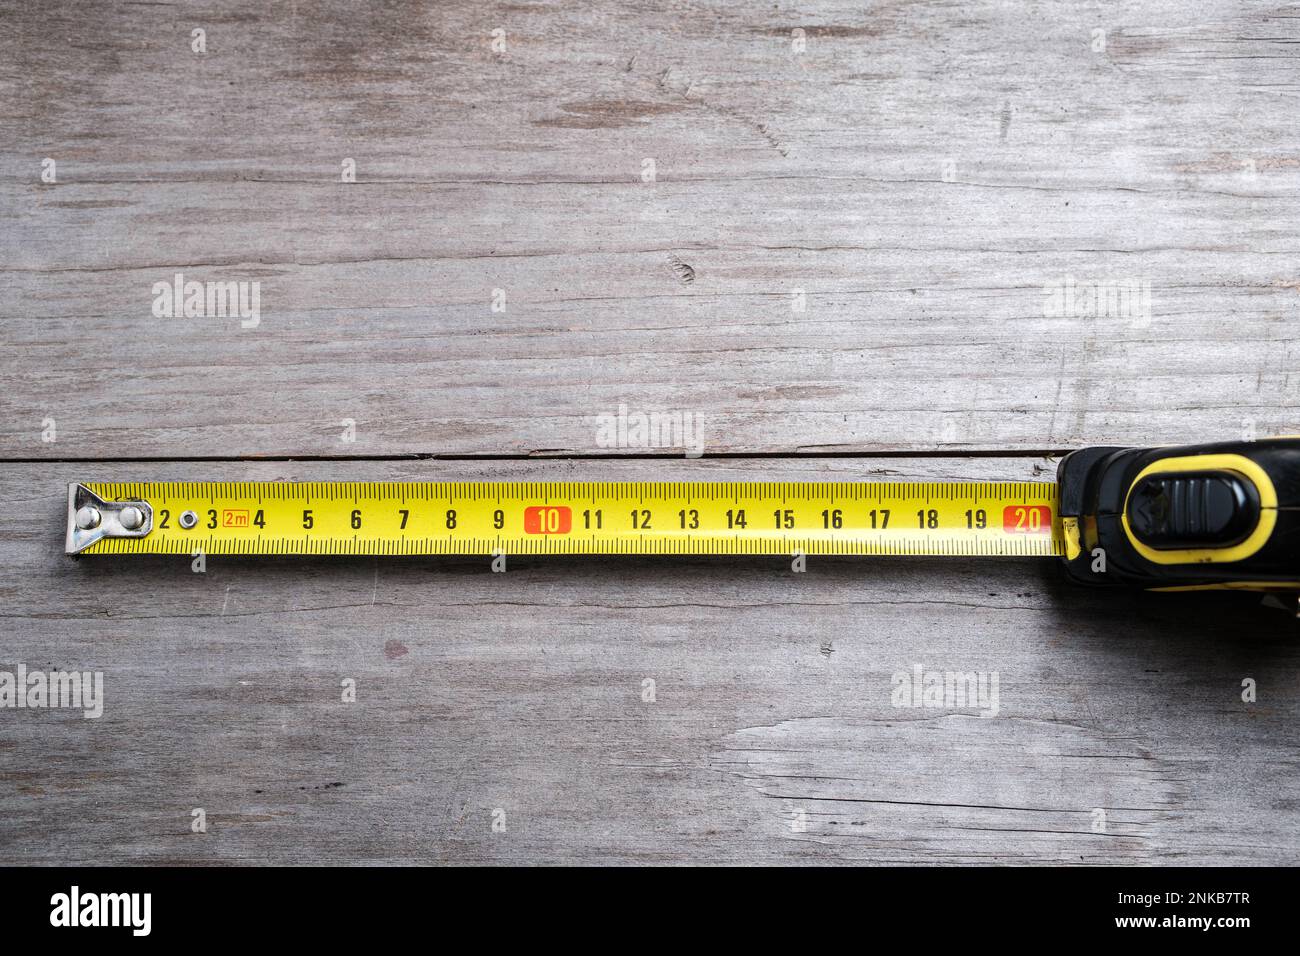 Measuring tape stretched 21 cm on a wooden background. Close-up. Selective focus. Stock Photo